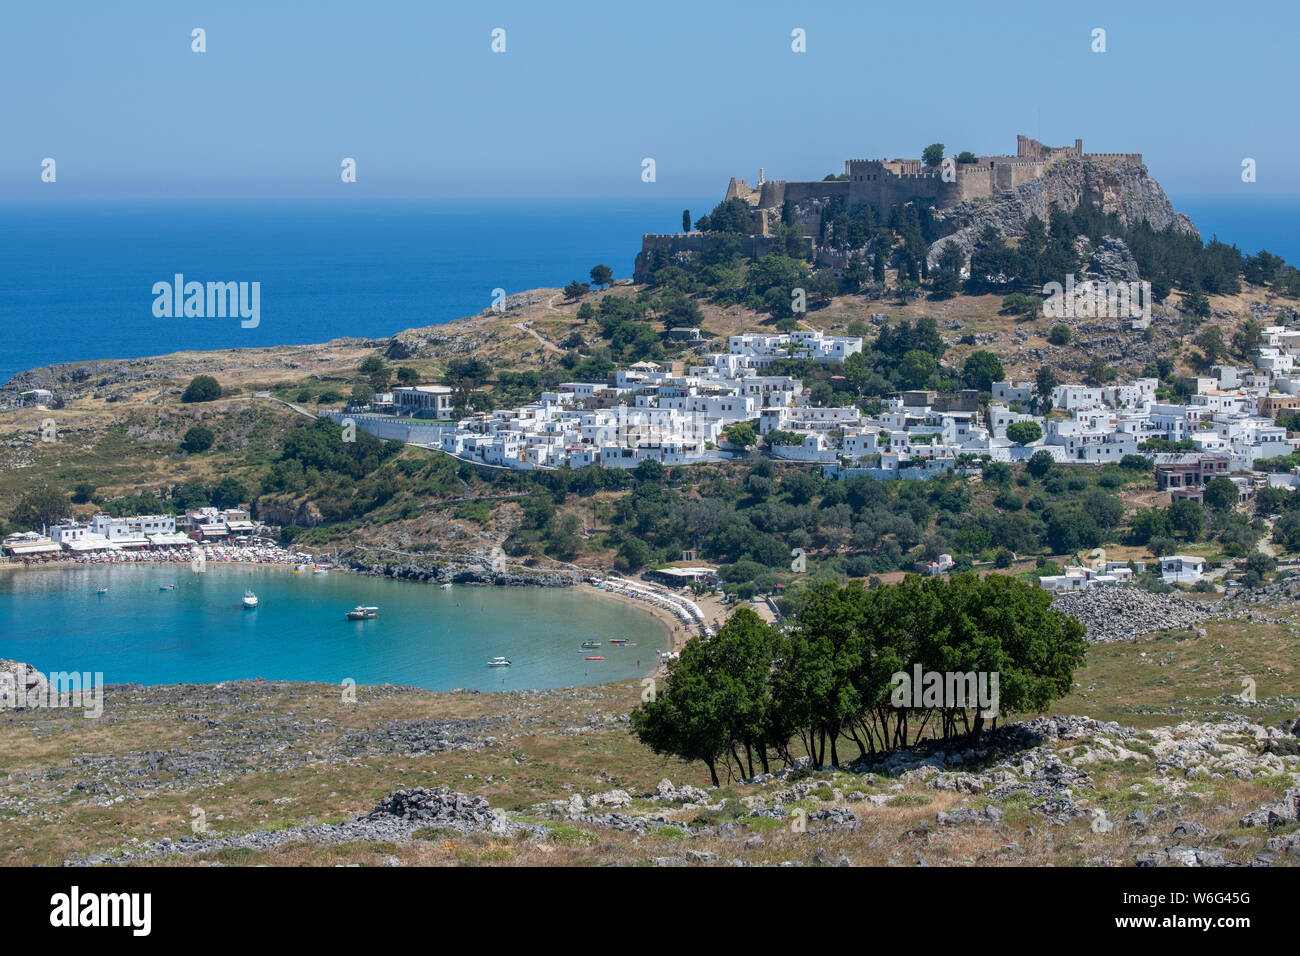 Greece, Rhodes, the largest of the Dodecanese islands. Historic Lindos, scenic view of Acropolis of Lindos and the ruins of Temple of Athena Lindia. Stock Photo